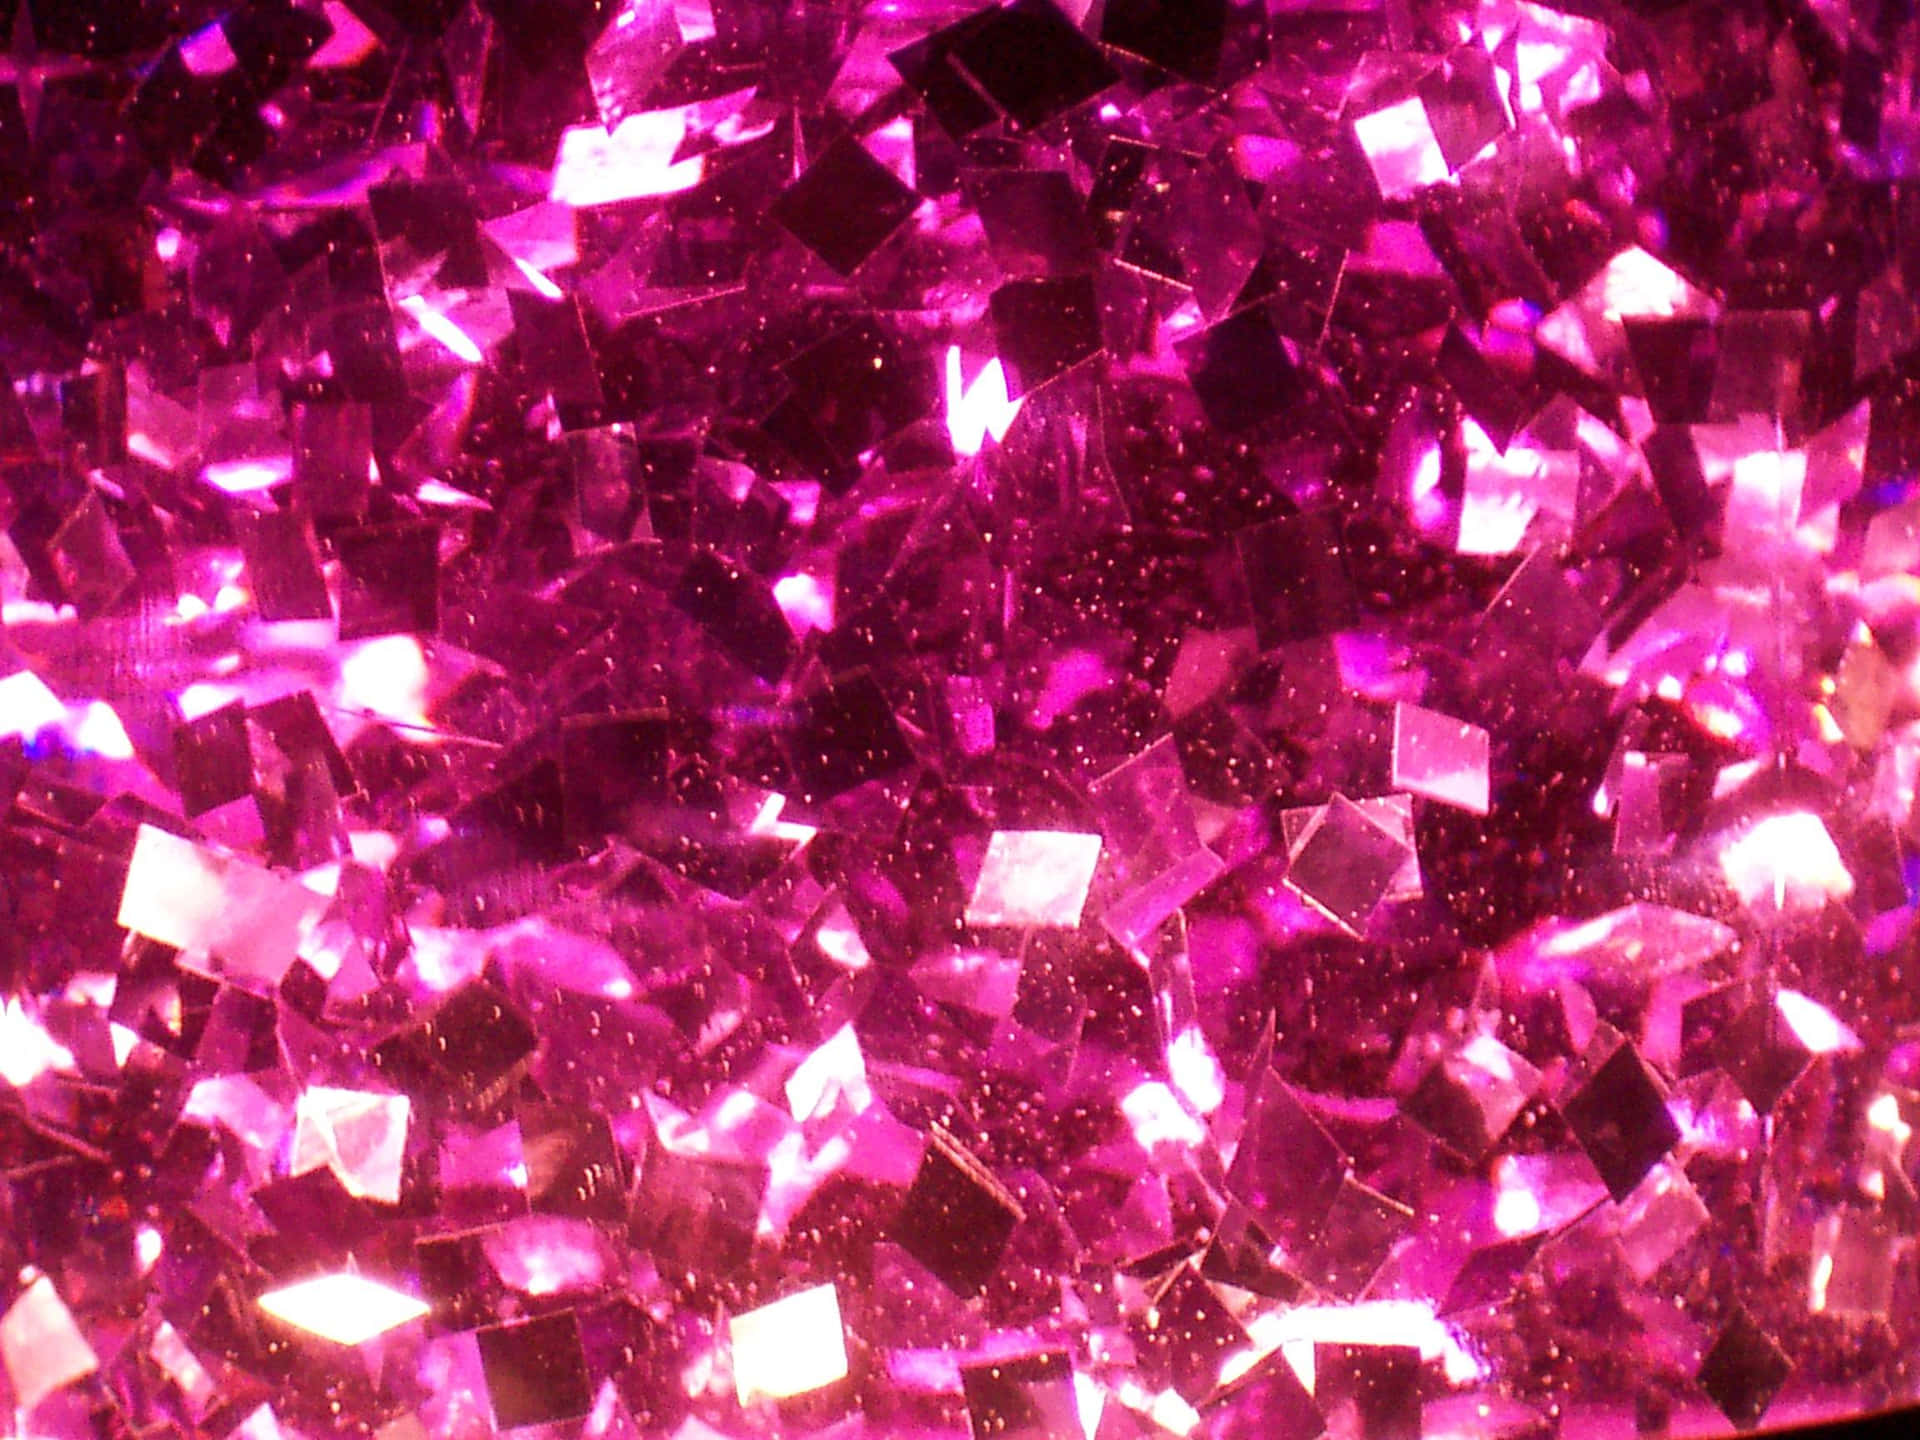 glitter backgrounds pink